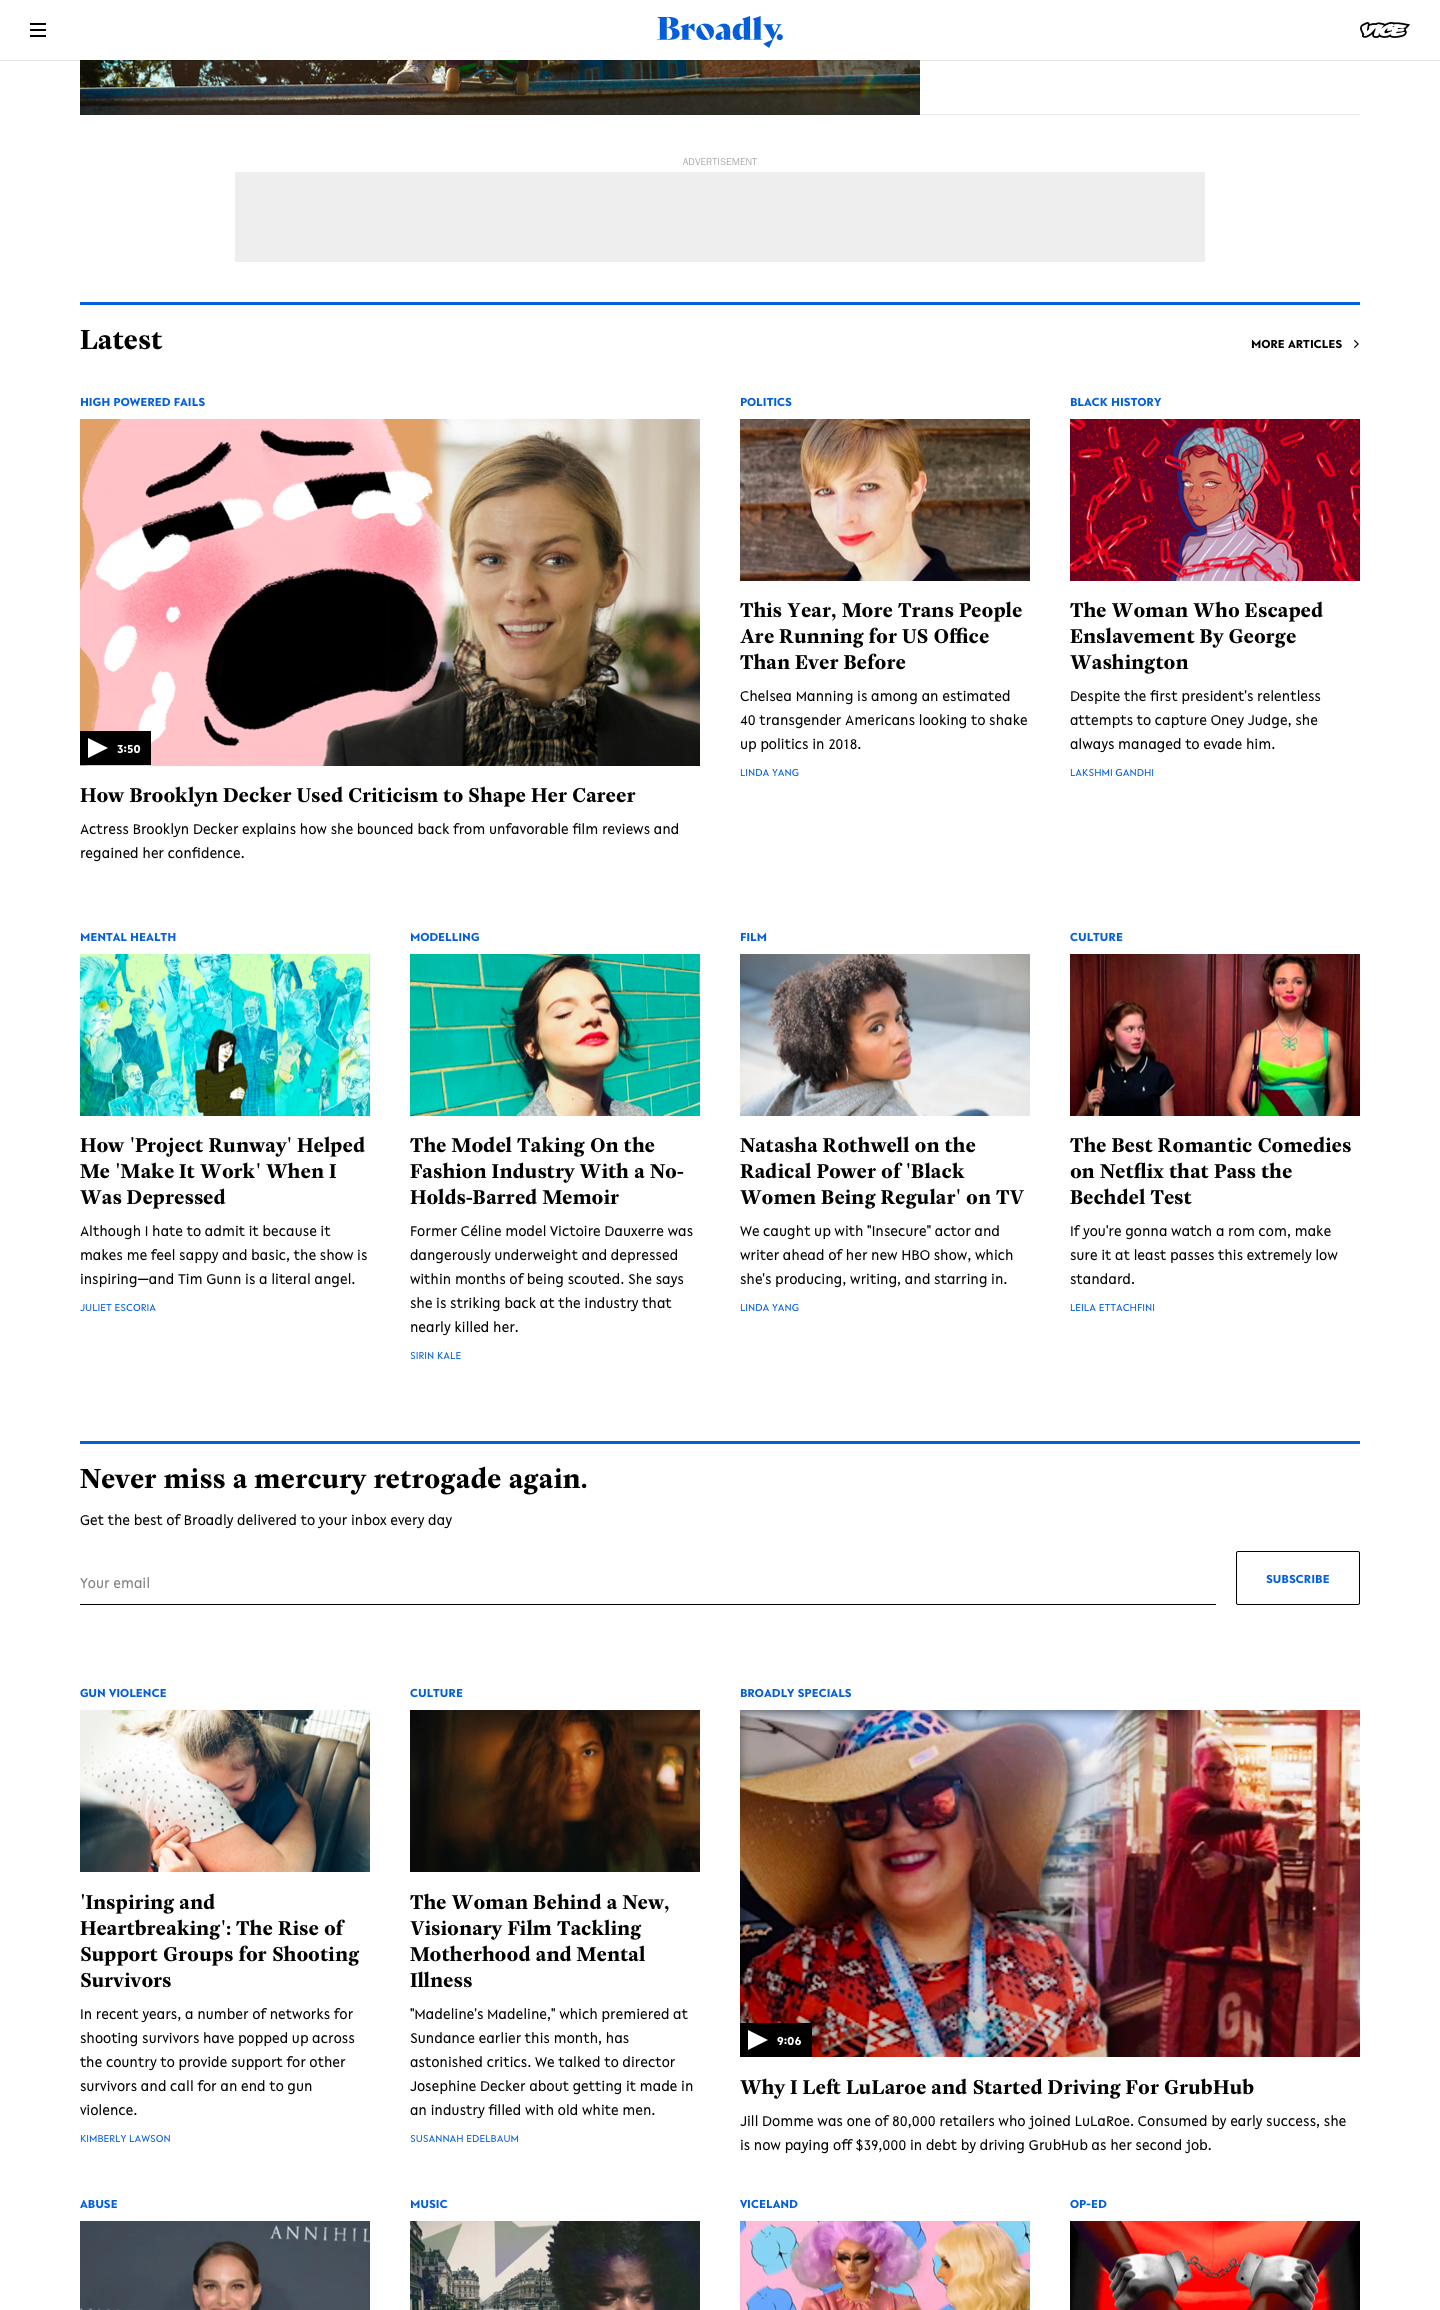 Broadly's updated homepage